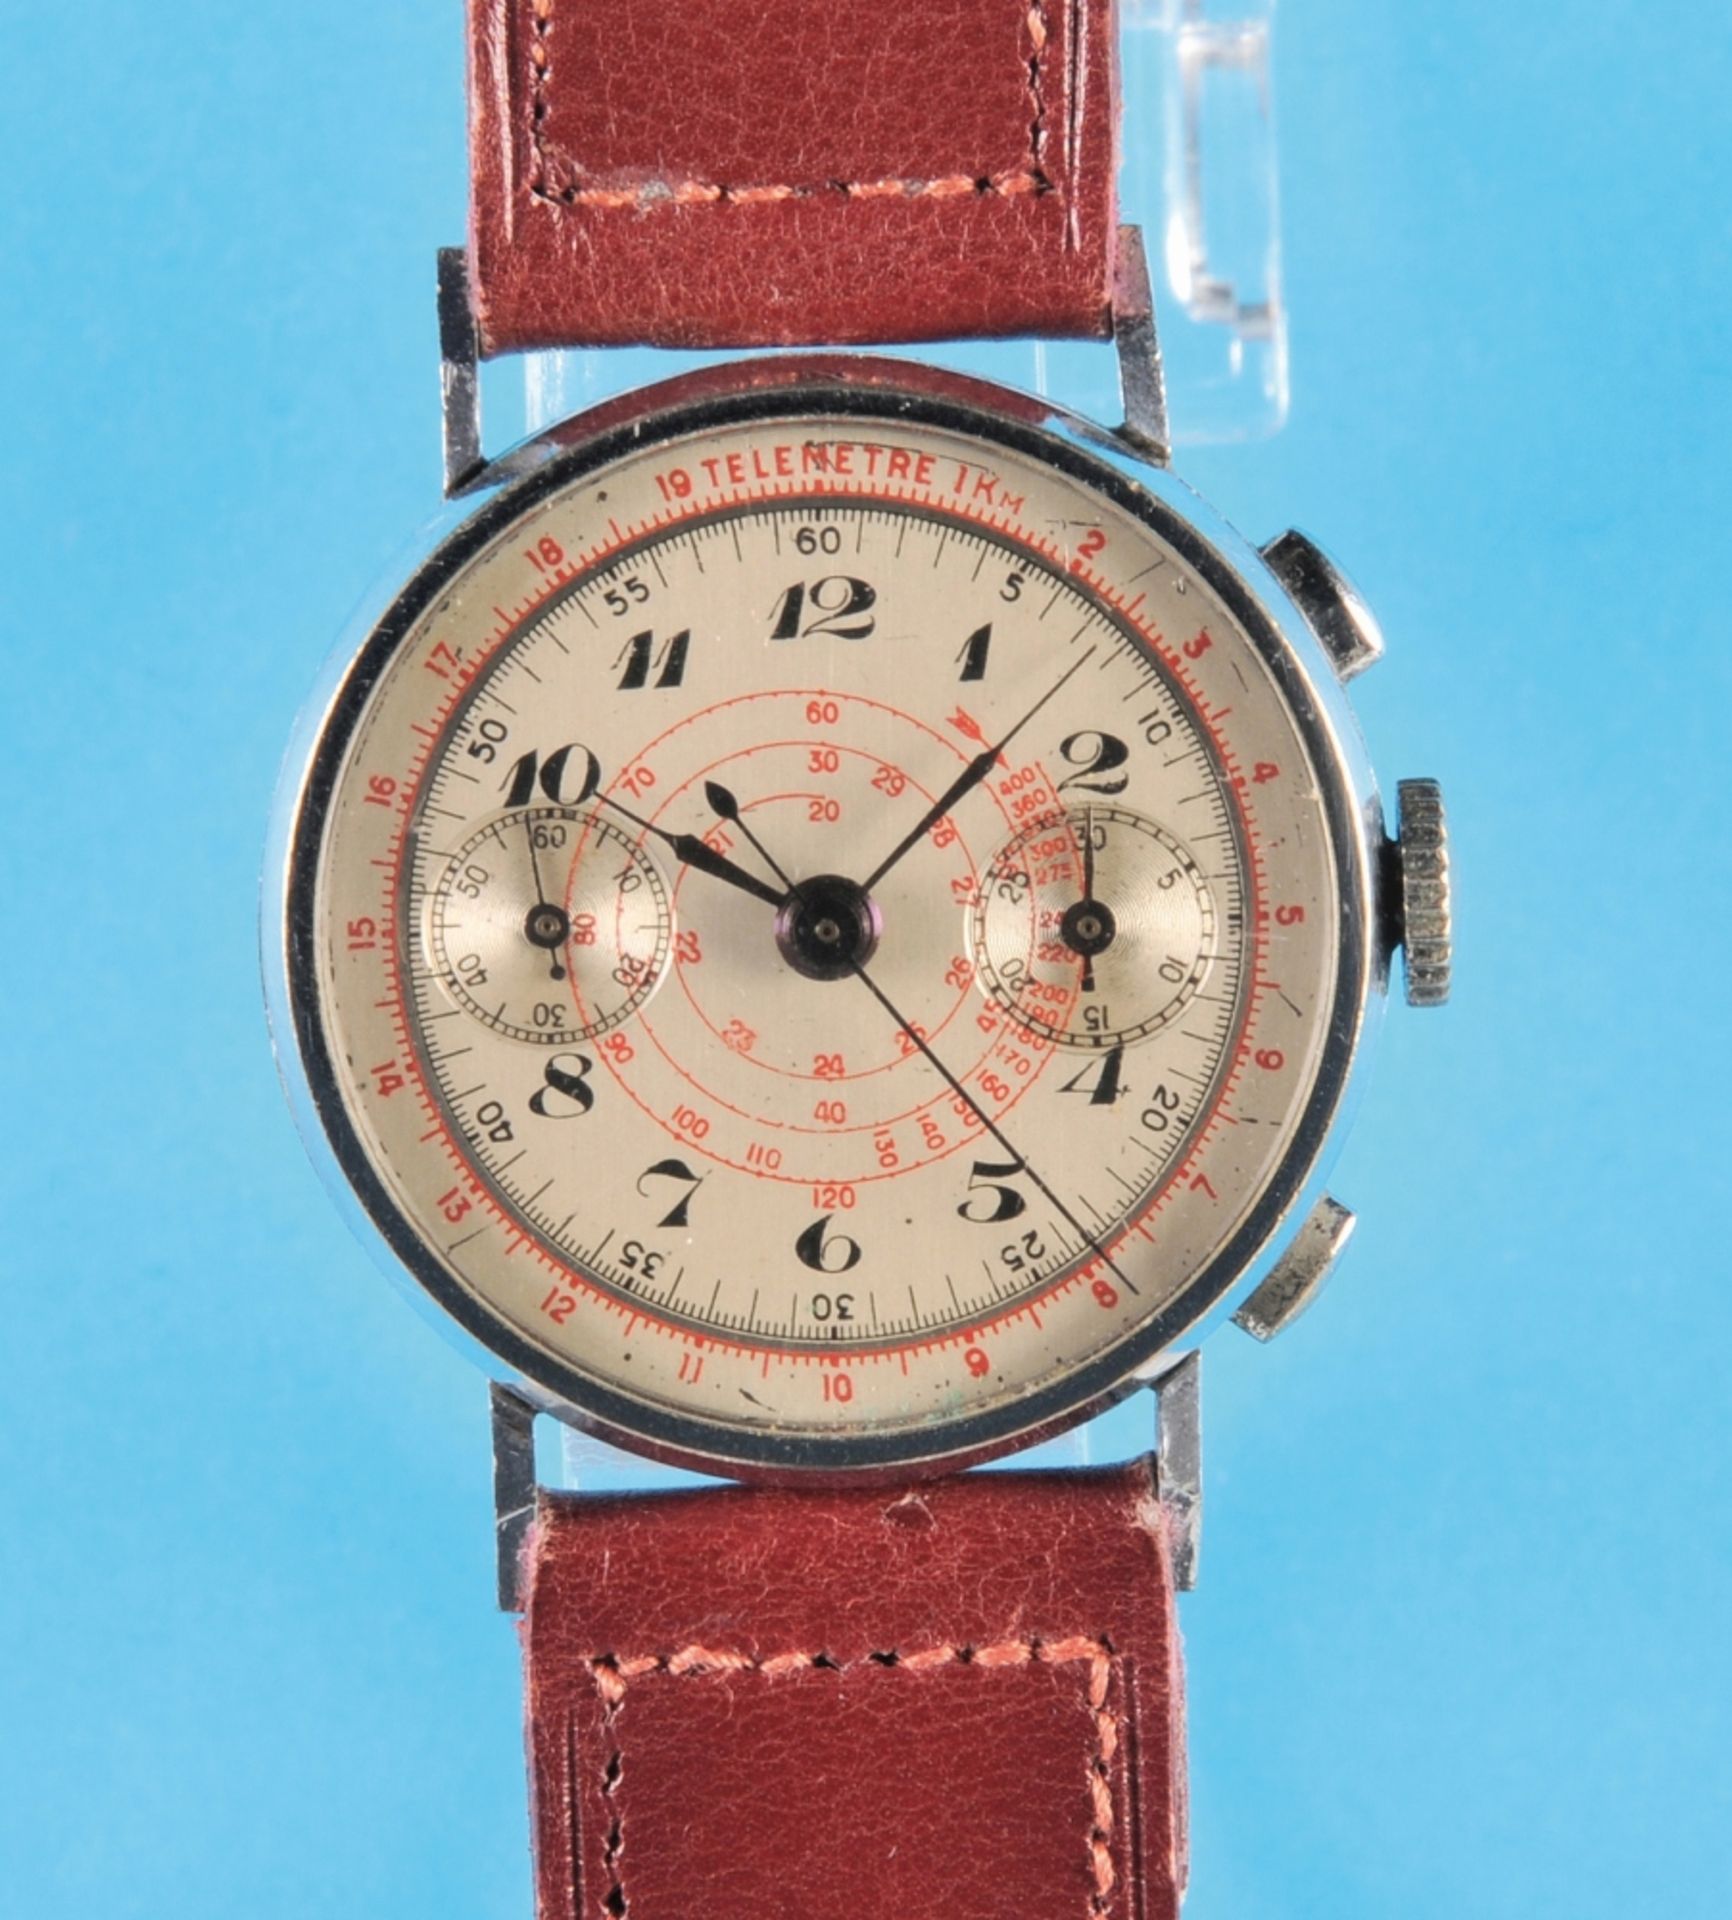 Vintage wristwatch with ratchet wheel chronograph and 30-minute counter, cal. Landeron 13, 1940s, ca